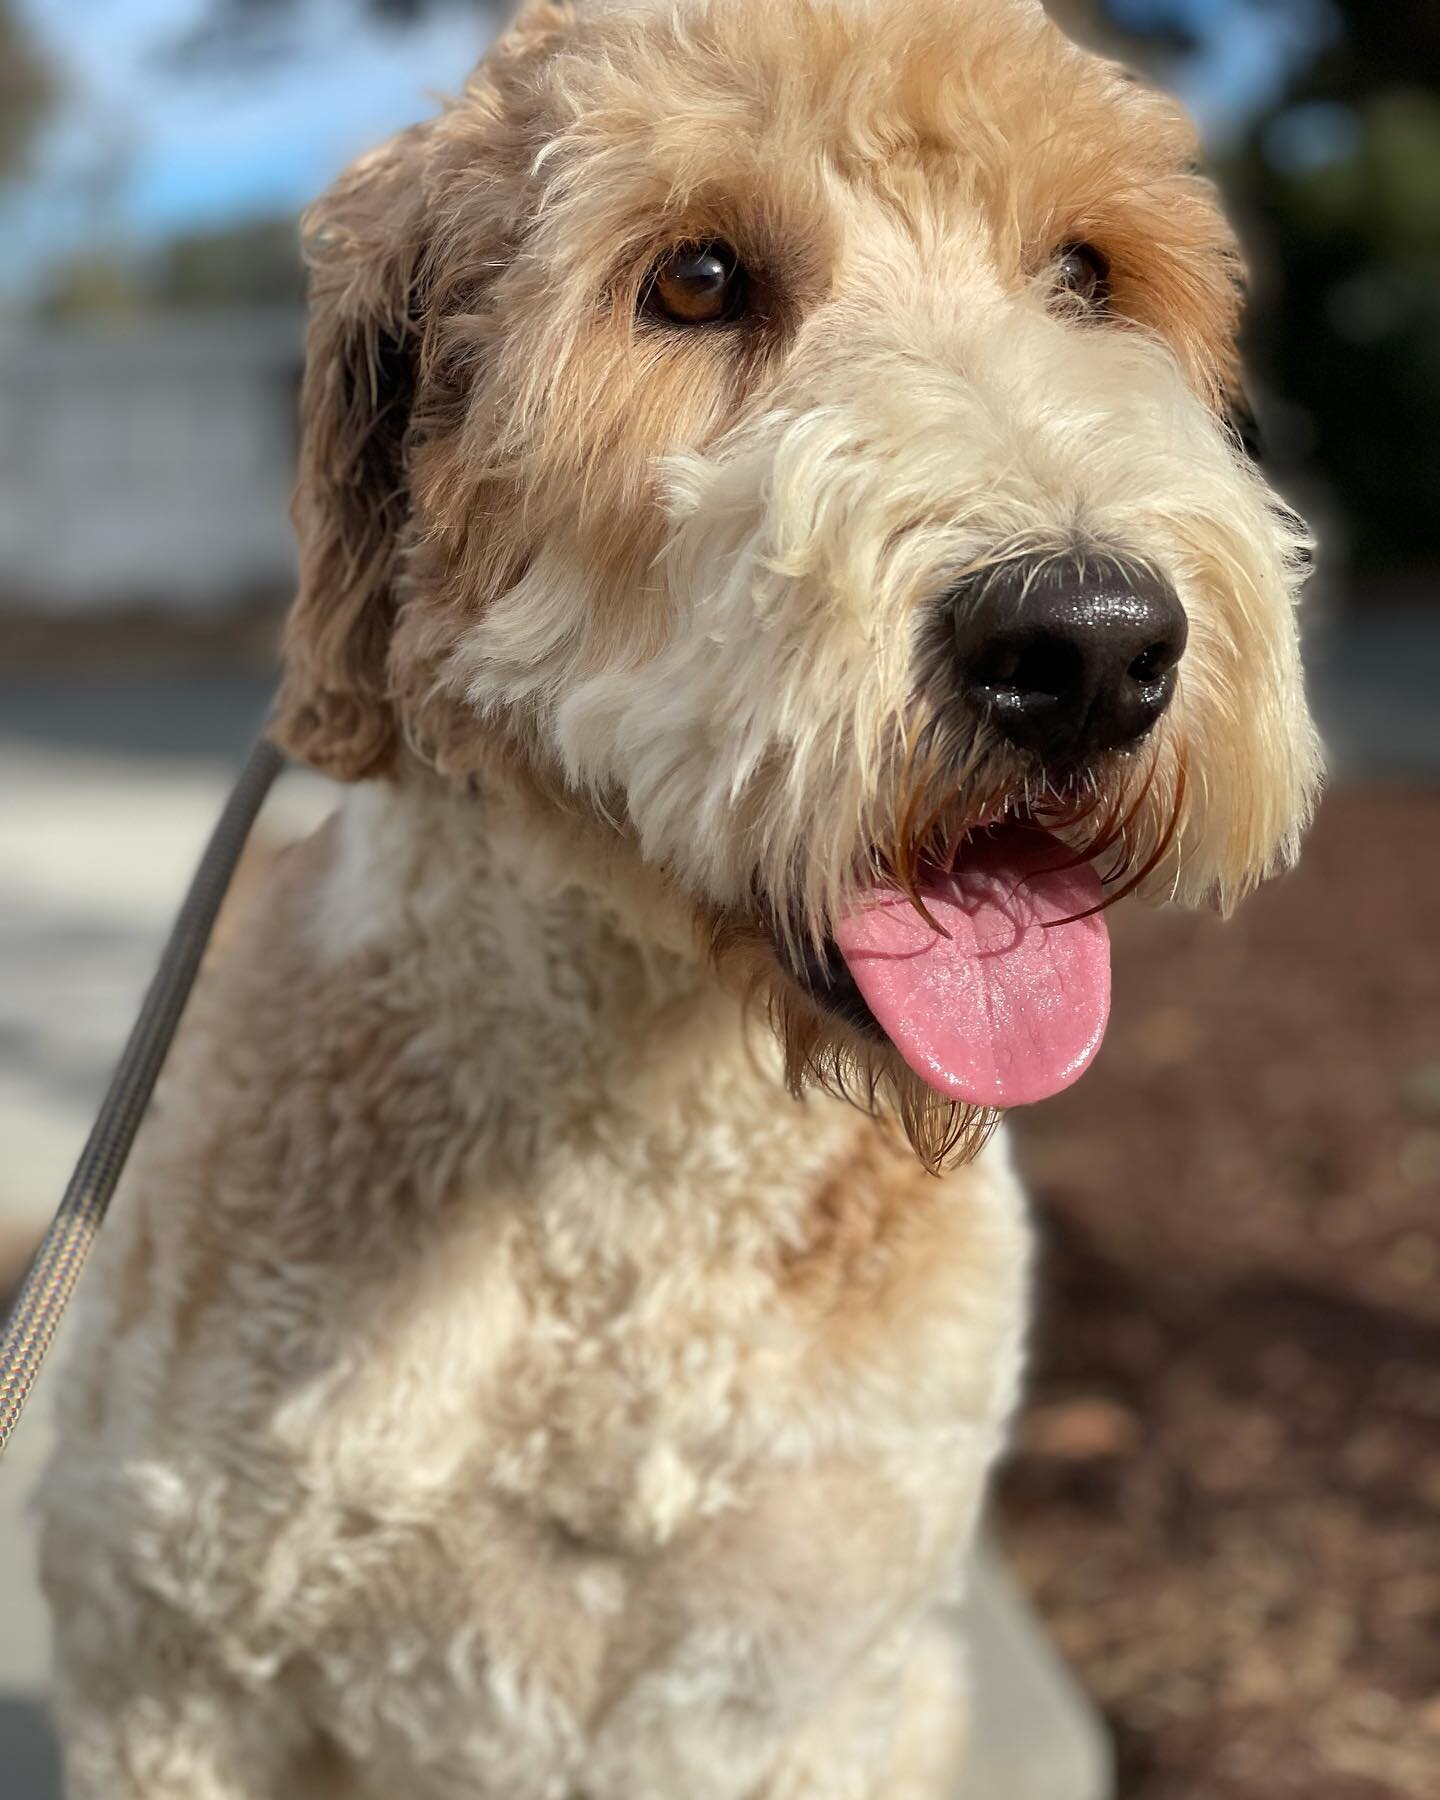 Meet Chance. This handsome labradoodle is about 2 years old. 

Chance is sweet, a bit shy, affectionate to his people, so gentle, loves to give hugs, enjoys going for walks, is great with all dogs, cats and chickens but loves the calm ones best. Chan